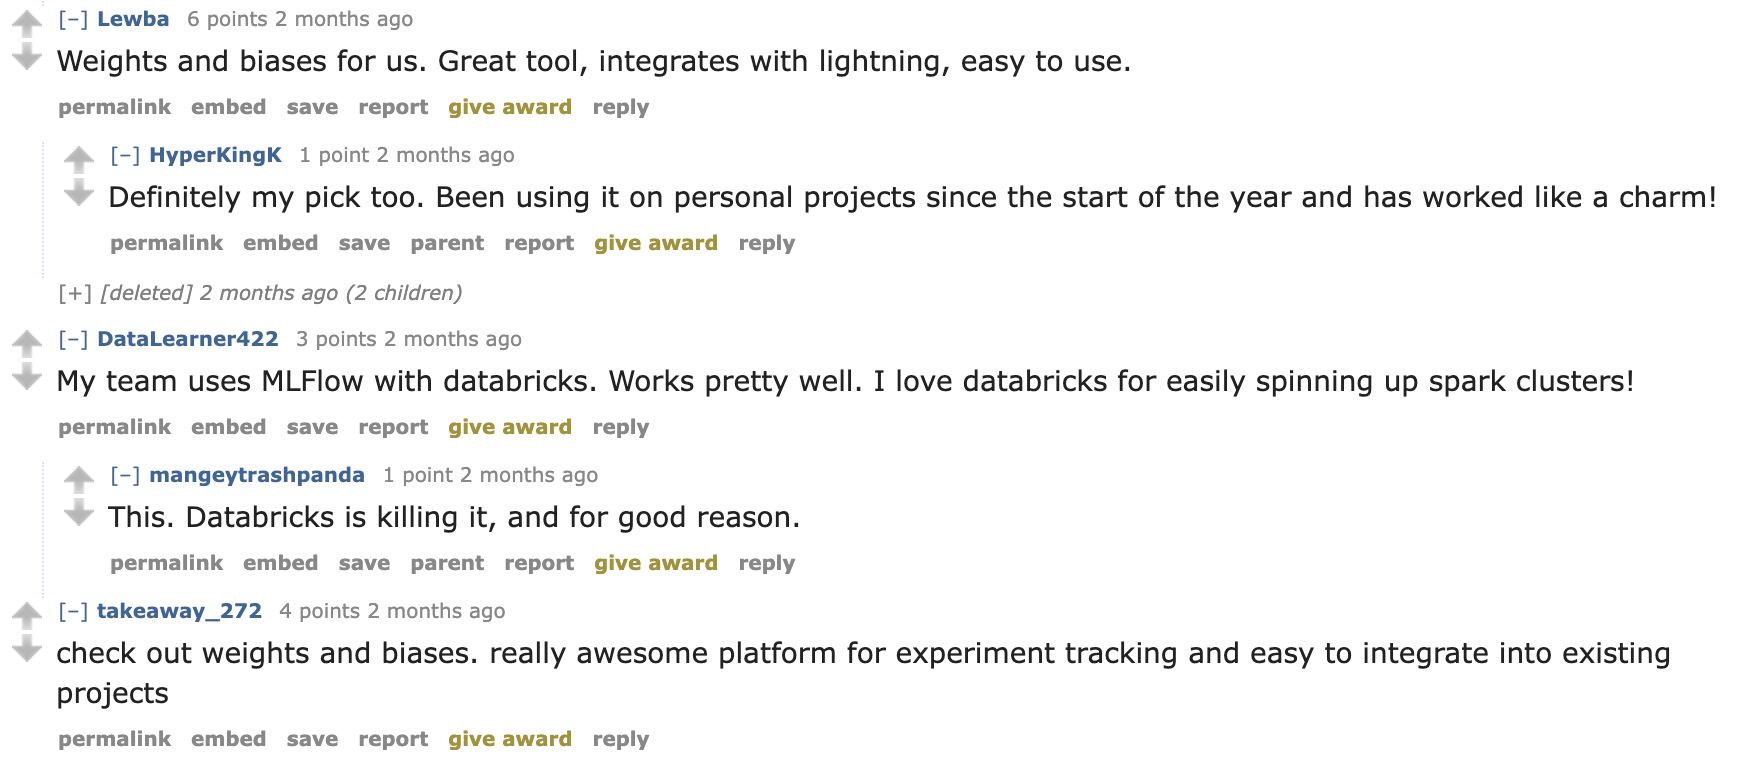 Screenshot of selected comments with one comment “Weights and biases for us. Great tool, integrates with lightning, easy to use.” and a reply “Definitely my pick too. Been using it on personal projects since the start of the year and has worked like a charm!”, another comment “My team uses MLFlow with databricks. Works pretty well. I love databricks for easily spinning up spark clusters!” and a reply “This. Databricks is killing it, and for good reason.” and another comment: “check out weights and biases. really awesome platform for experiment tracking and easy to integrate into existing projects”.